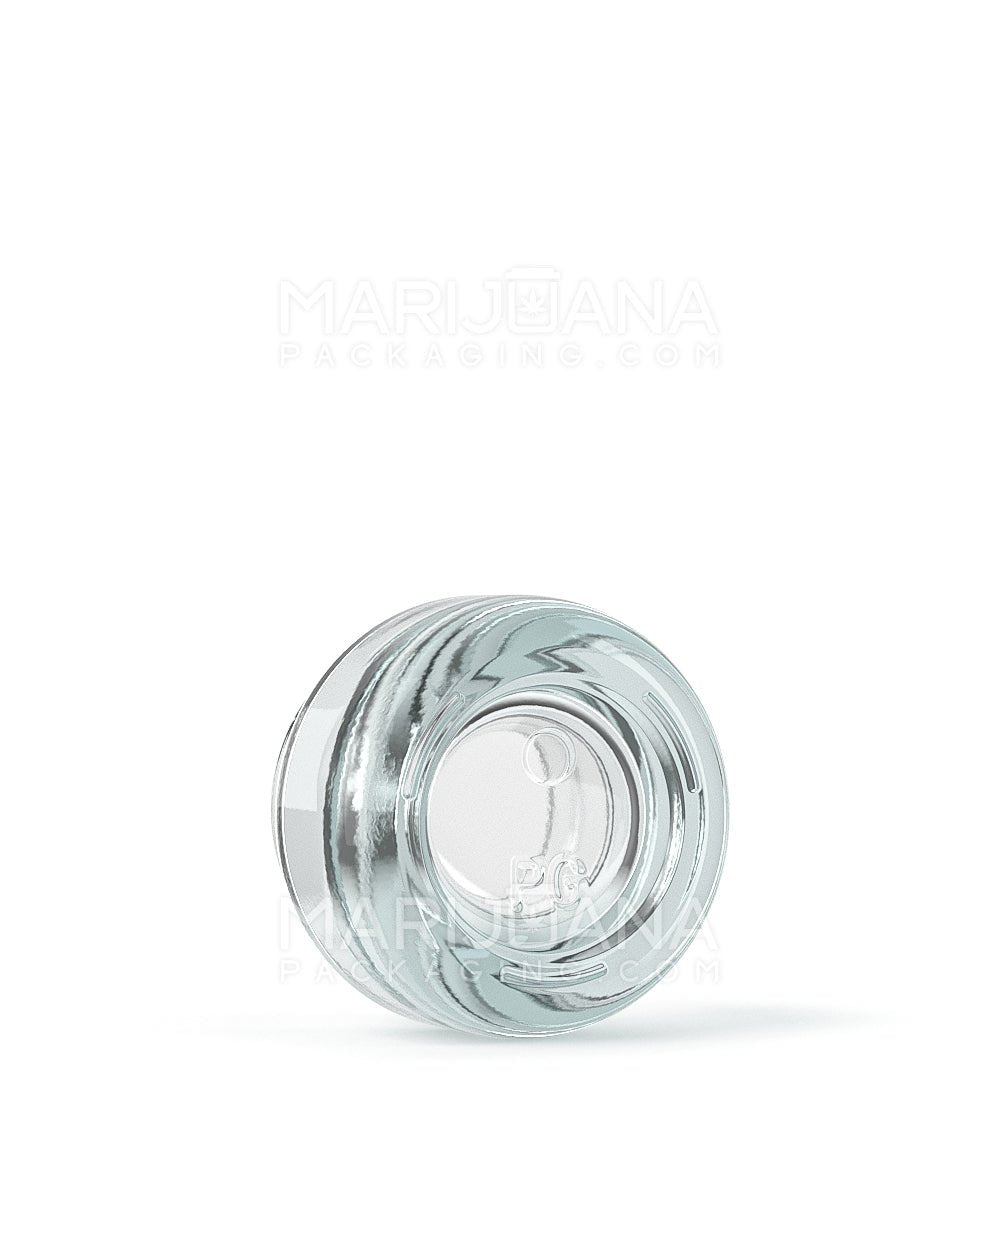 POLLEN GEAR | HiLine Glossy Clear Glass Concentrate Containers | 29mm - 5mL - 308 Count - 4